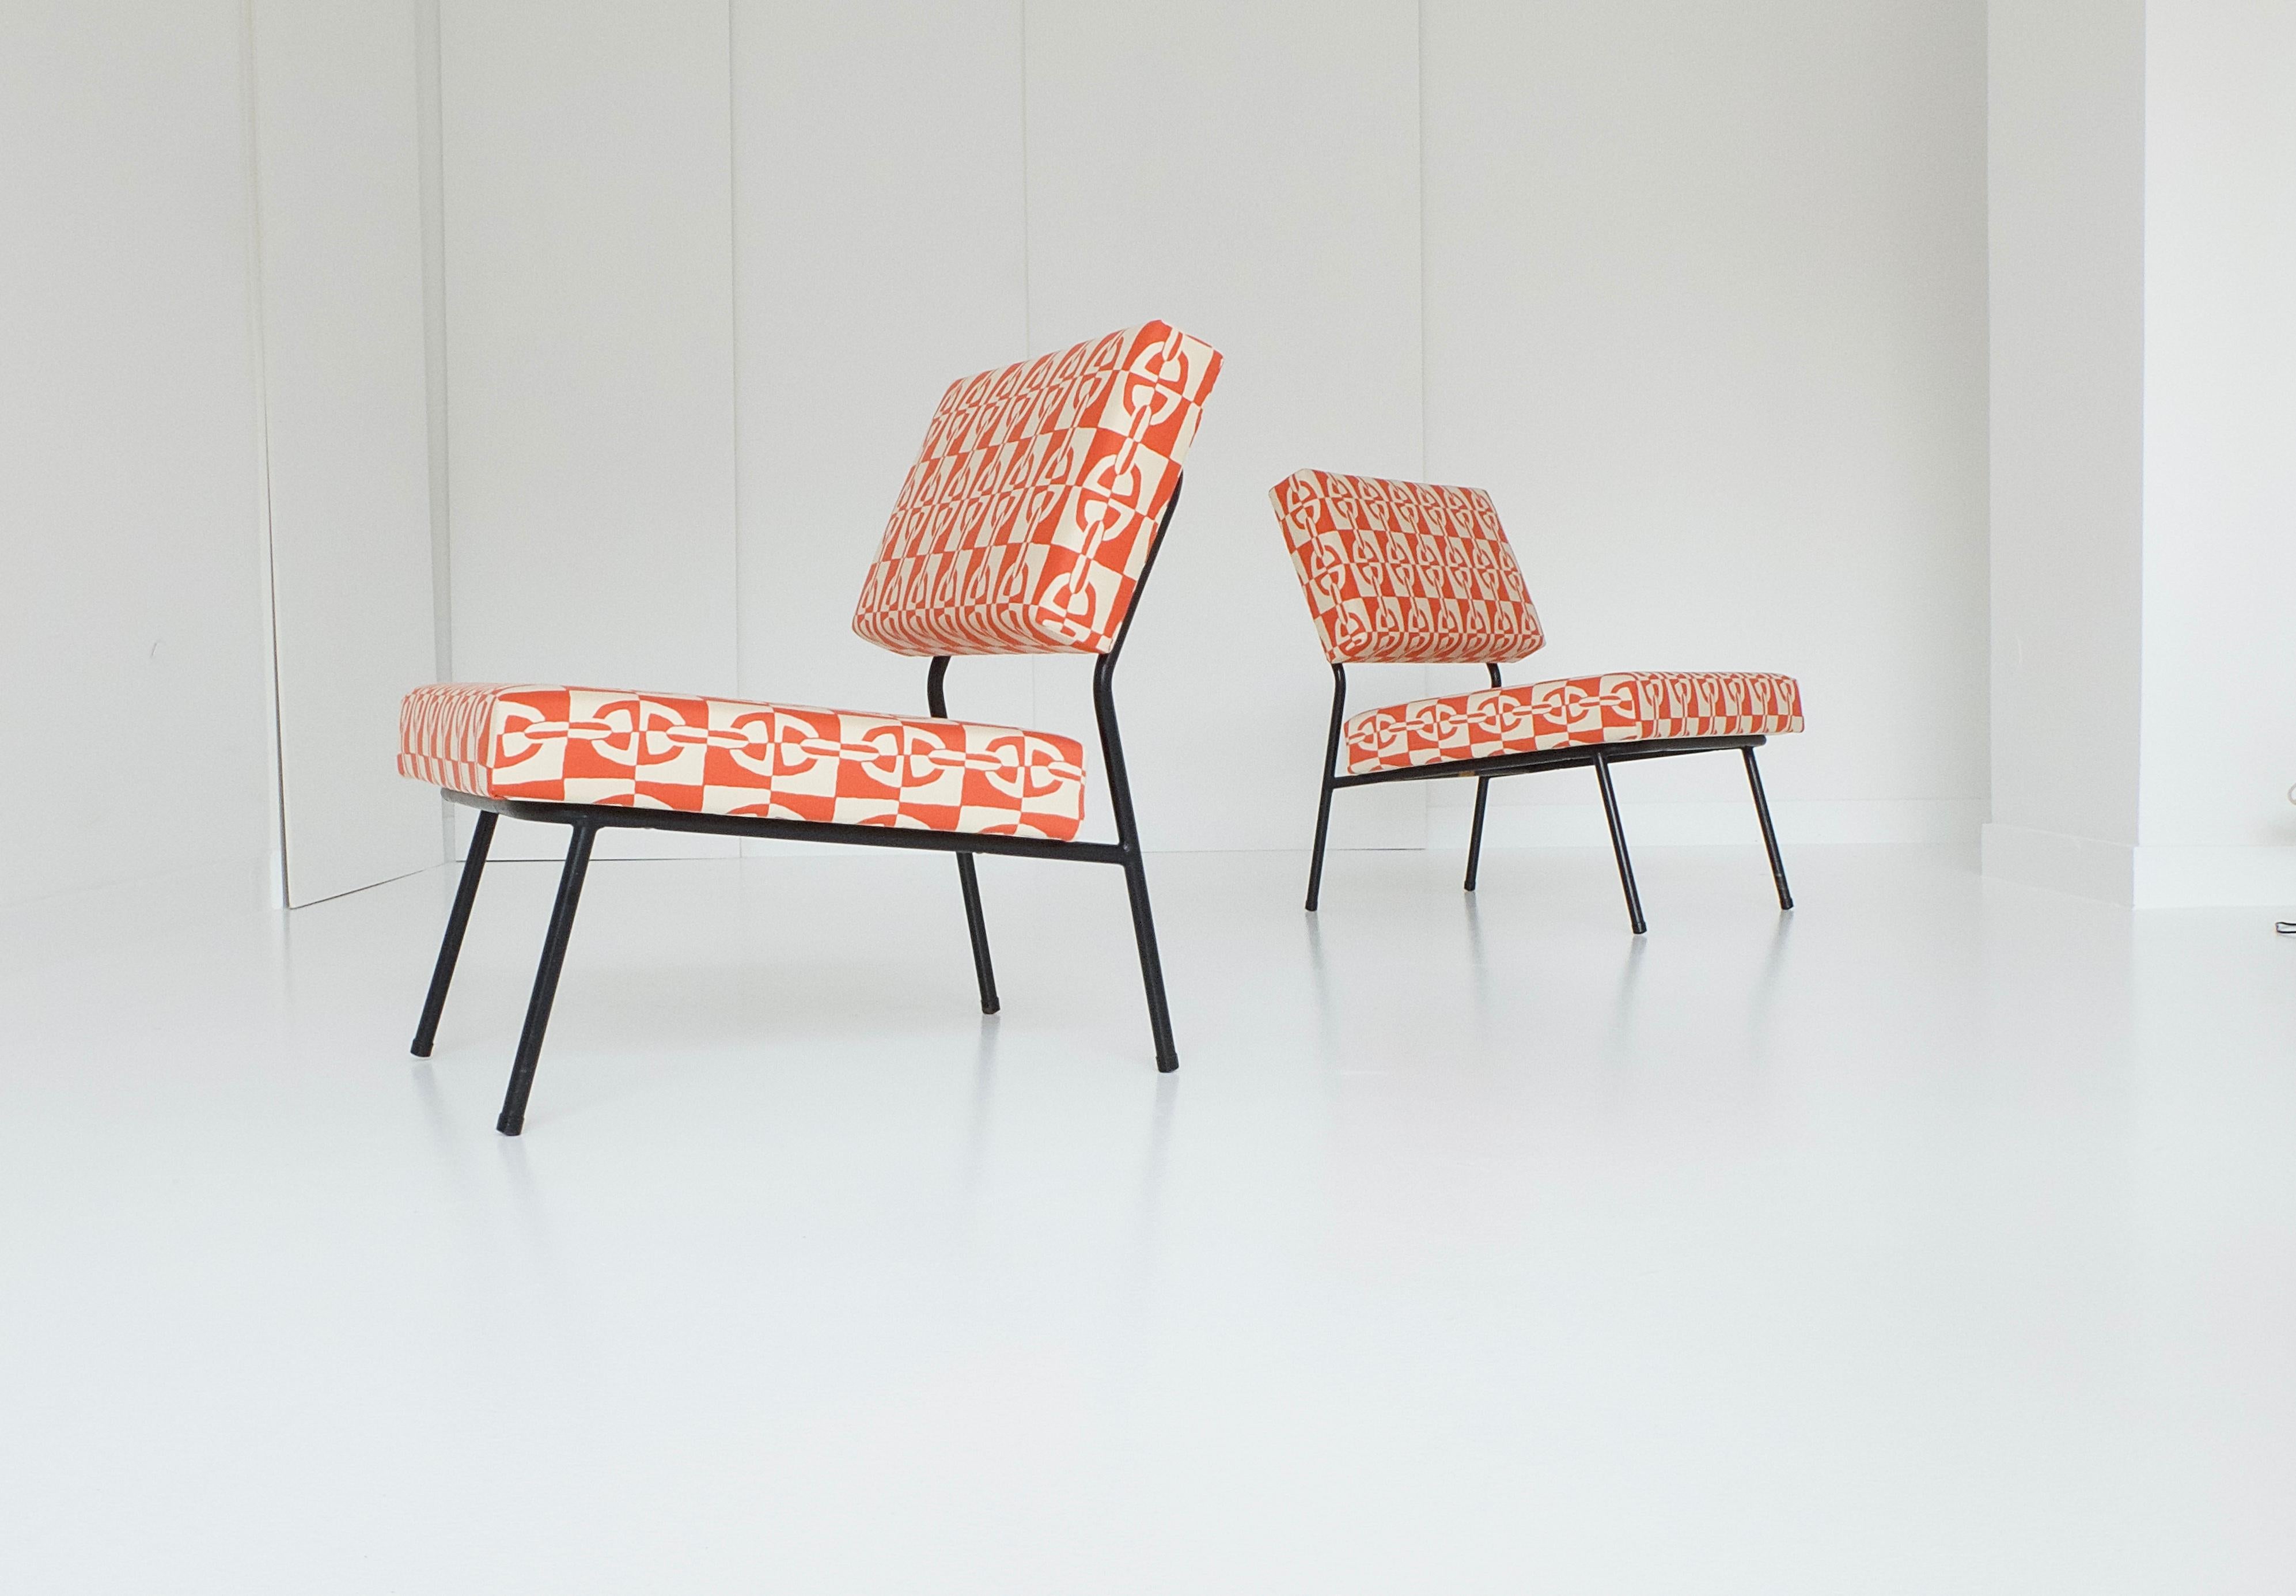 You may know these easy chairs designed by Paul Geoffroy in the early 1950s for Airborne, France. But you’ve never seen Hermès fabric on these chairs: we decided to go full luxury. With expertly reupholstered, new seat covers in the Classic